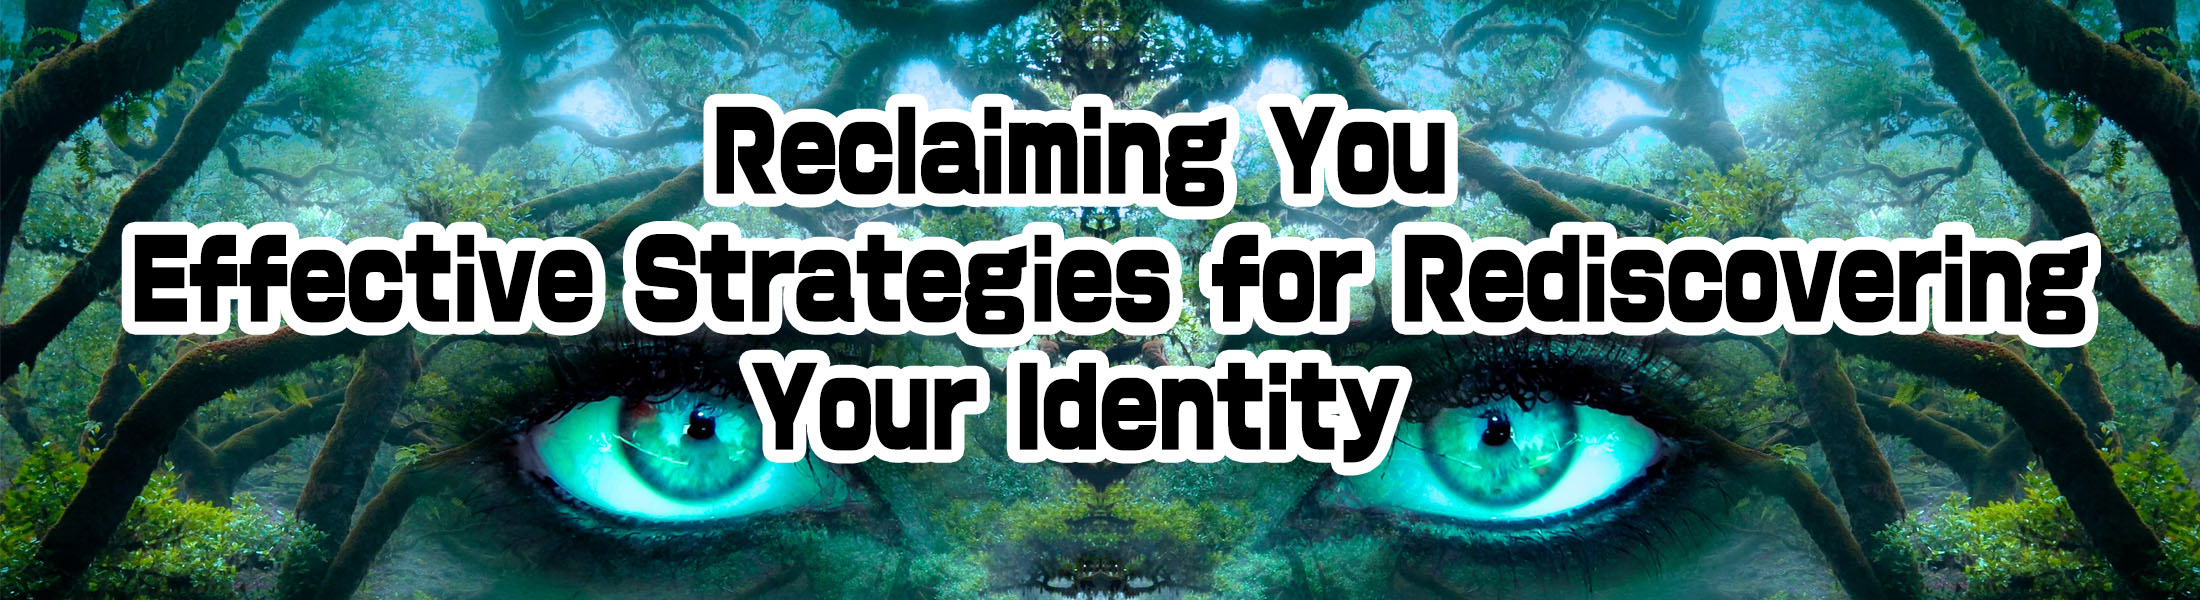 Reclaiming You: Effective Strategies for Rediscovering Your Identity